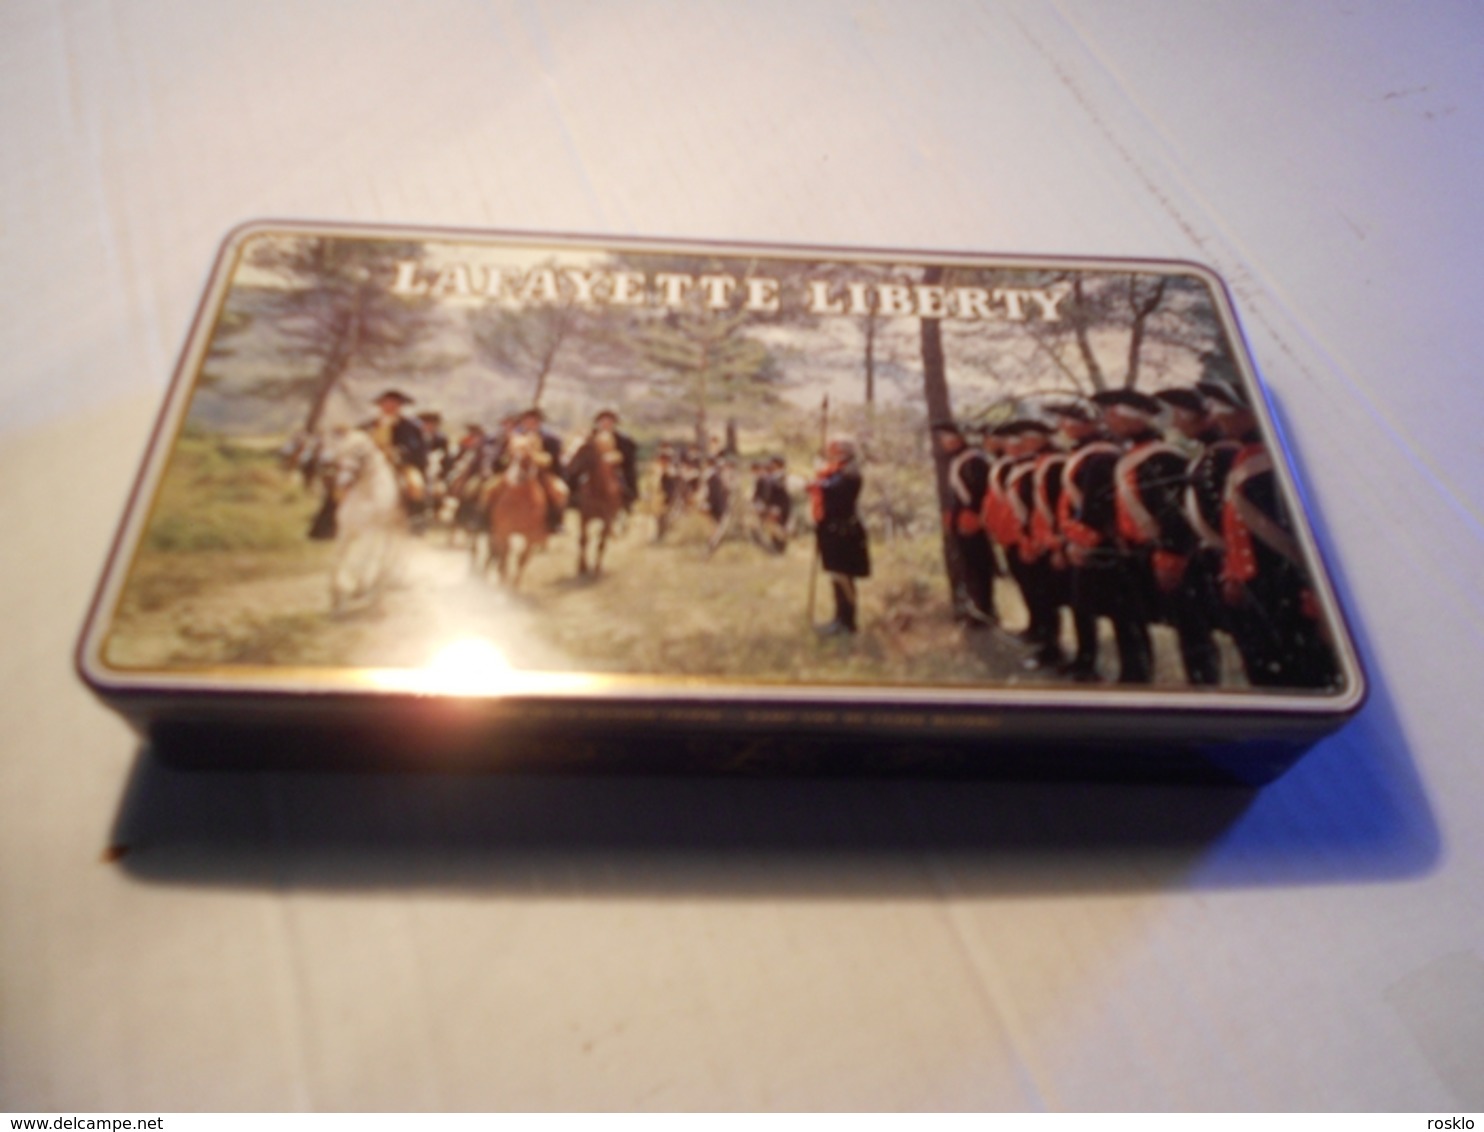 ANCIENNE-BOITE-a-biscuits-S-A-JUBILE-N-V-LAFAYETTE-LIBER - Dosen